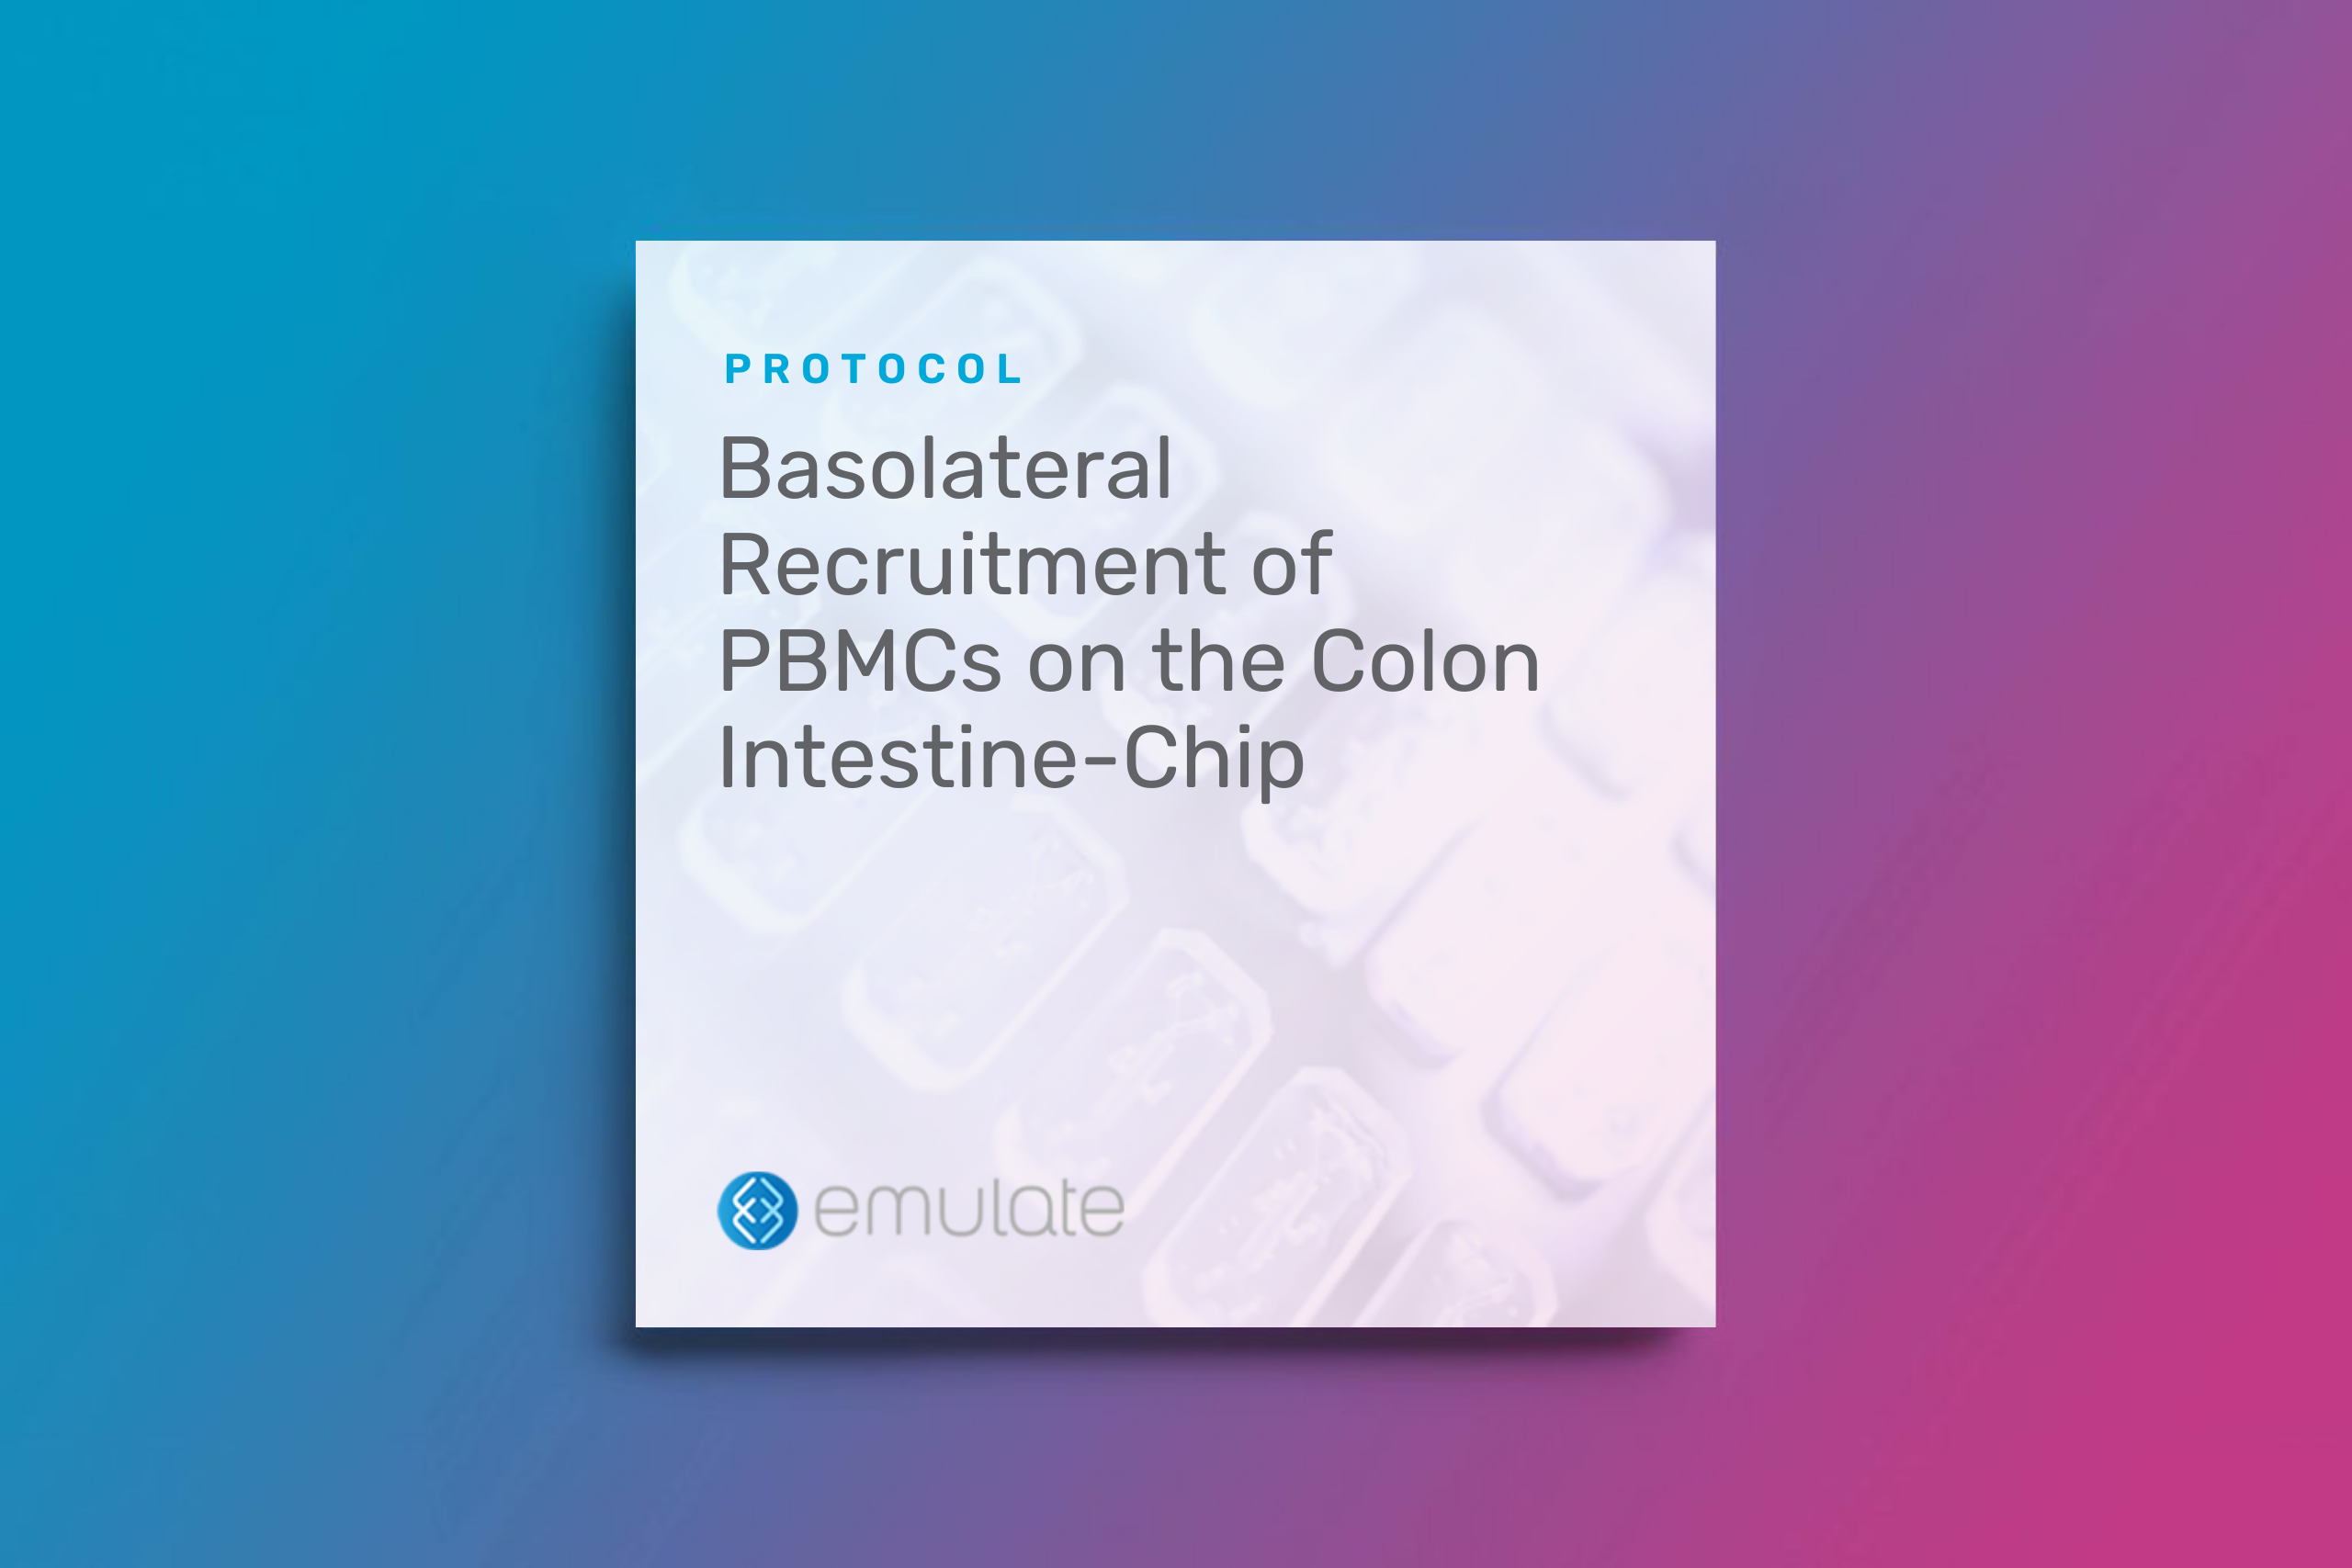 Basolateral Recruitment of Peripheral Blood Mononuclear Cells (PBMCs) on the Colon Intestine-Chip